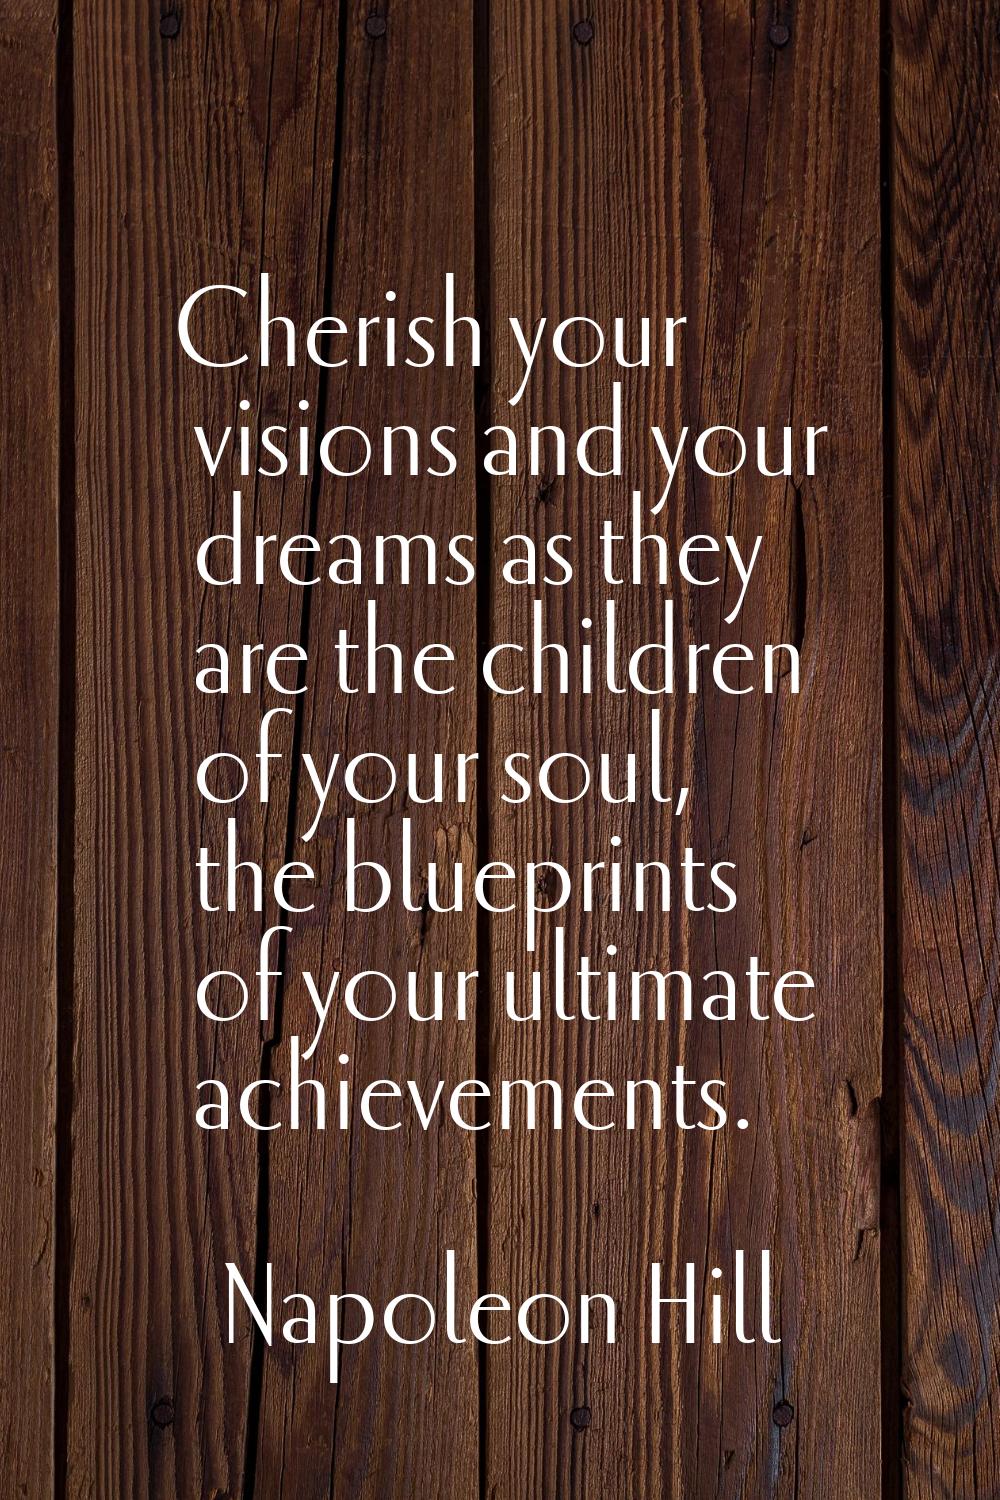 Cherish your visions and your dreams as they are the children of your soul, the blueprints of your 